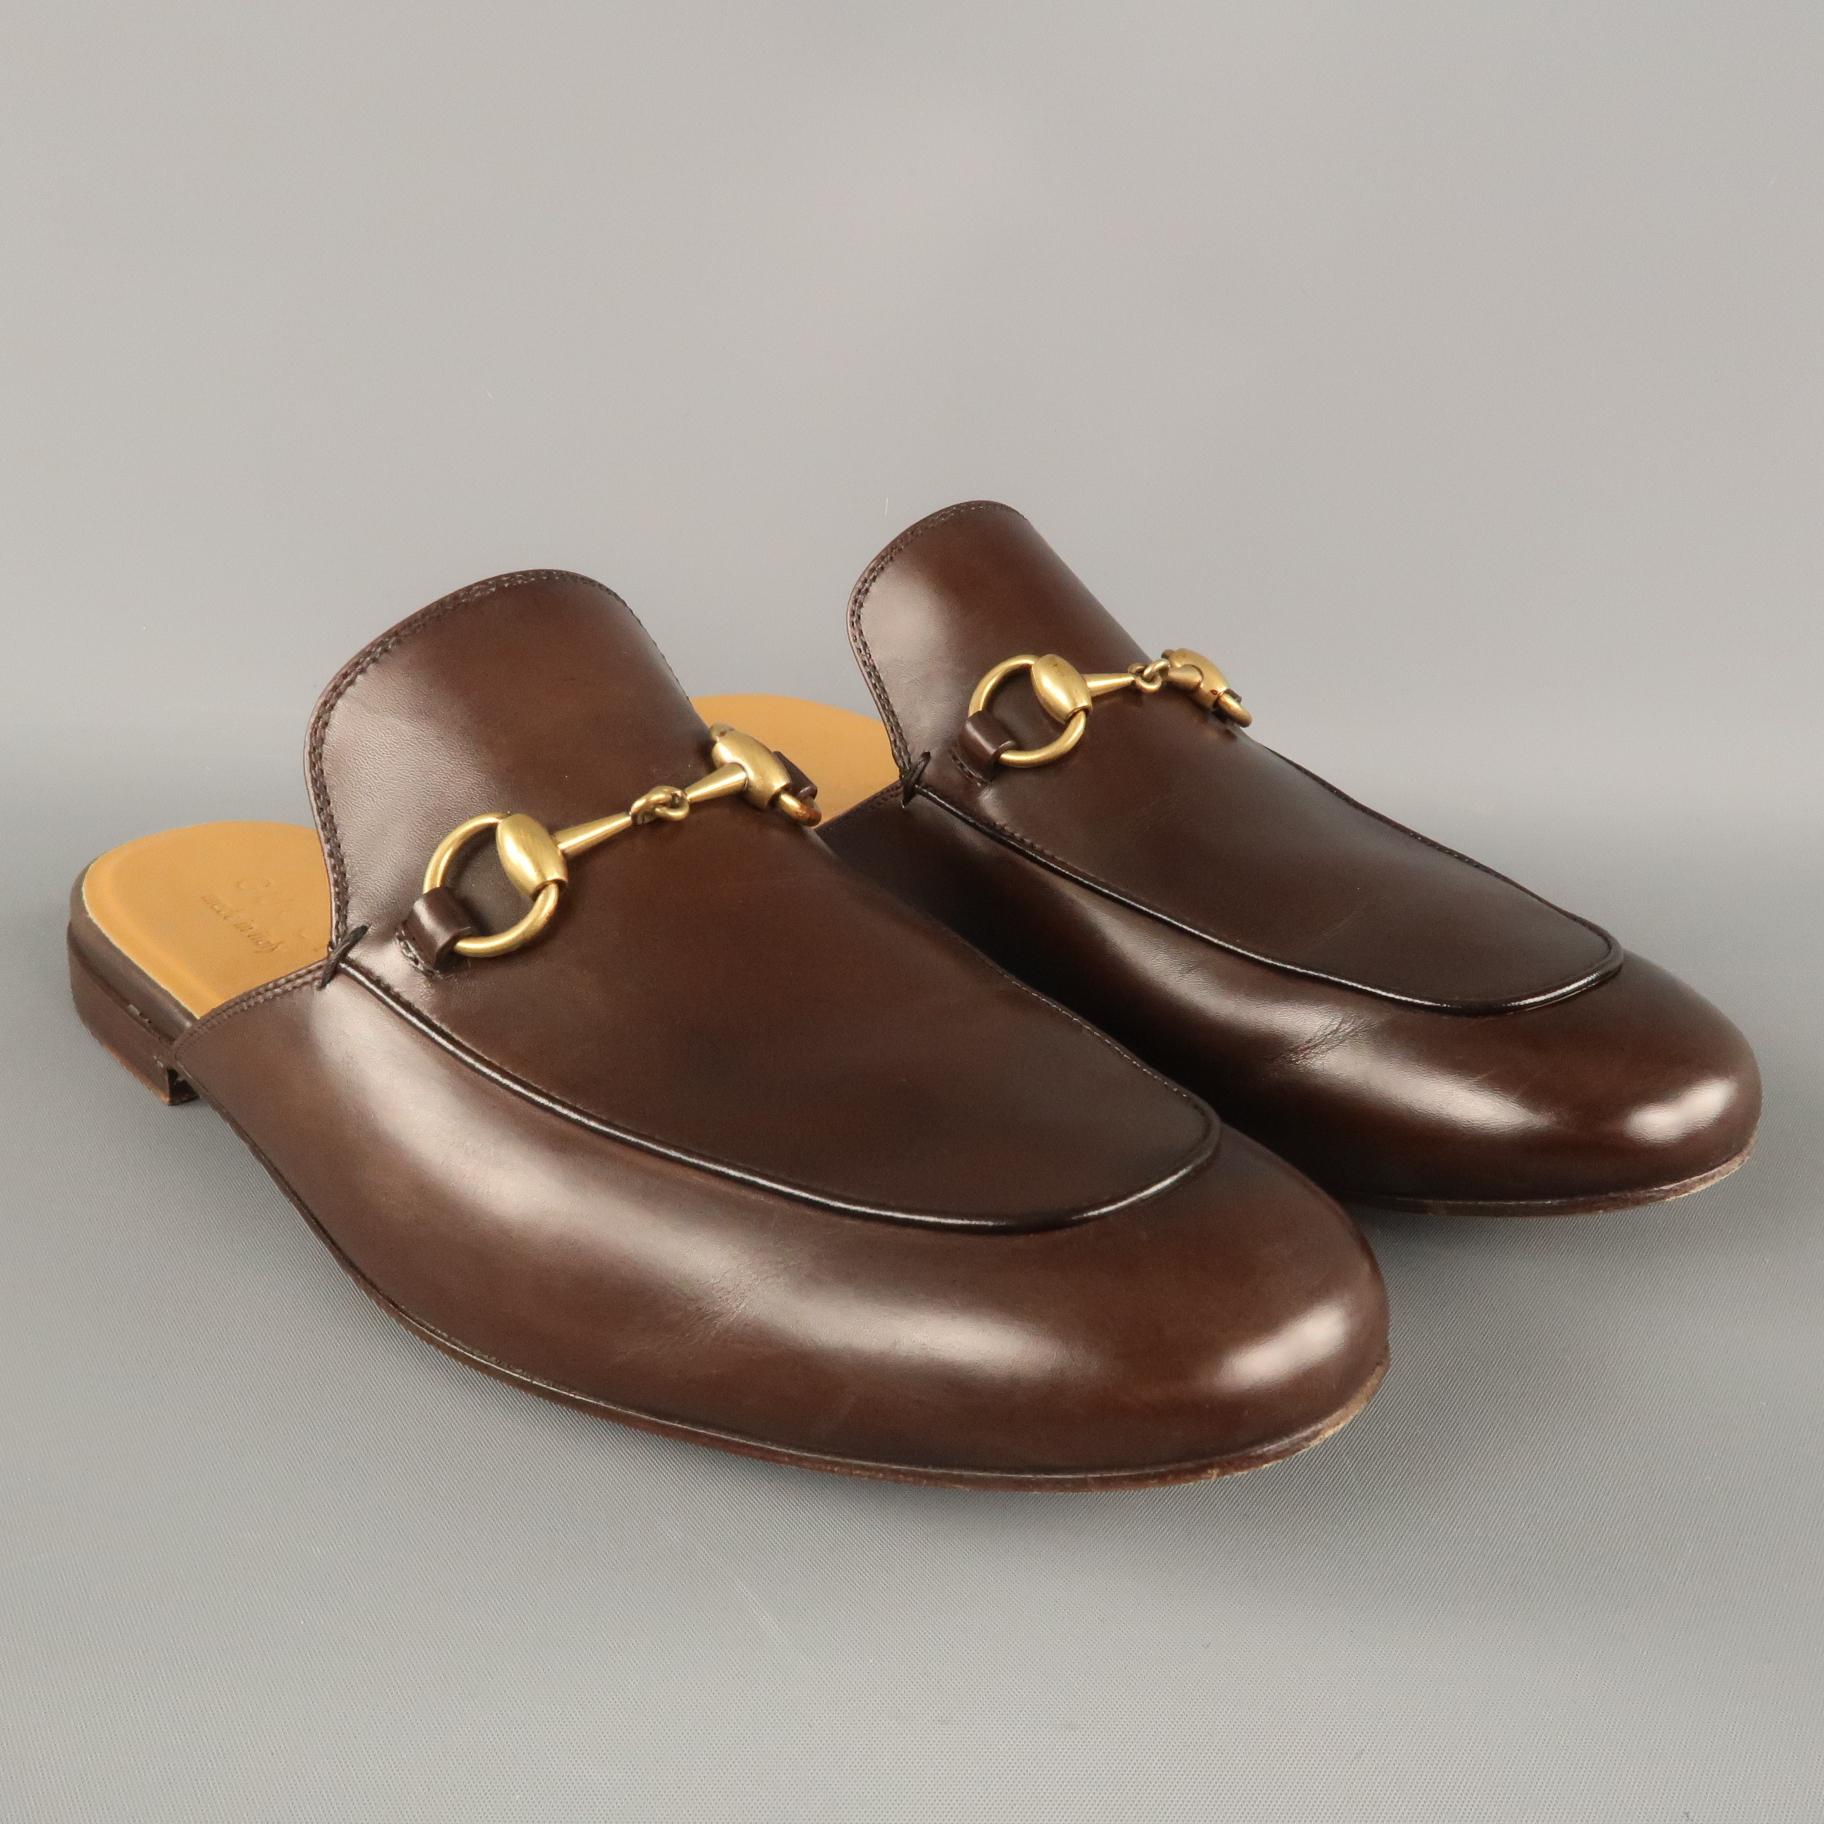 GUCCI Princetown Mule Slipper Shoes comes in a brown tone in a polished leather material, with a symbolic Gucci Horsebit at front, a rounded toe and a leather outsole. With Box. Made in Italy.

Excellent Pre-Owned Condition.
Marked: 426219 UK